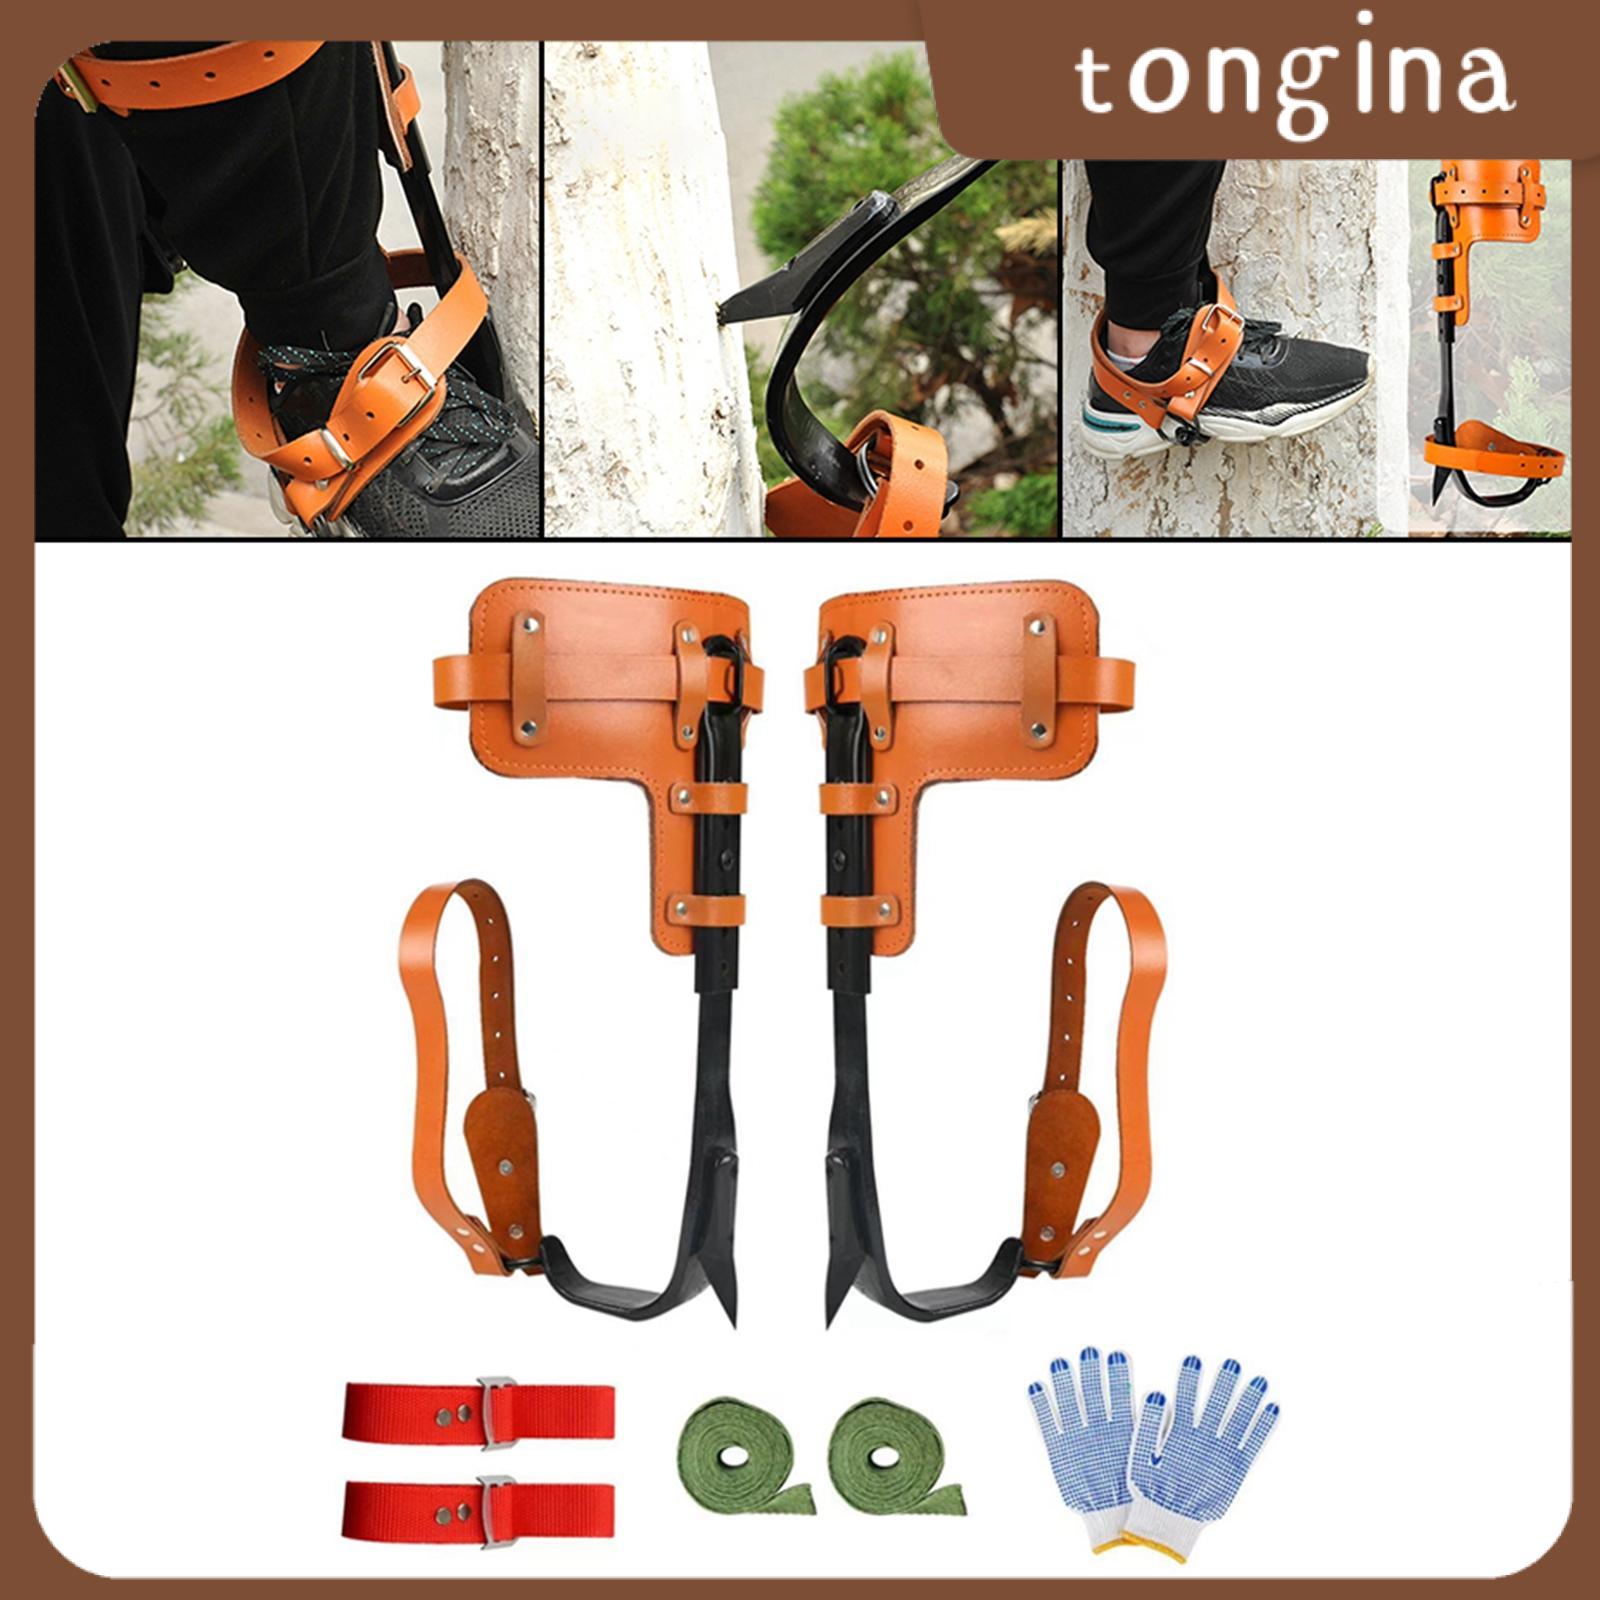 Tree Pole Climbing Spike Set 1/2 Gears Steel Claw Climbing Tree Spikes With  Adjustable Safety Belt